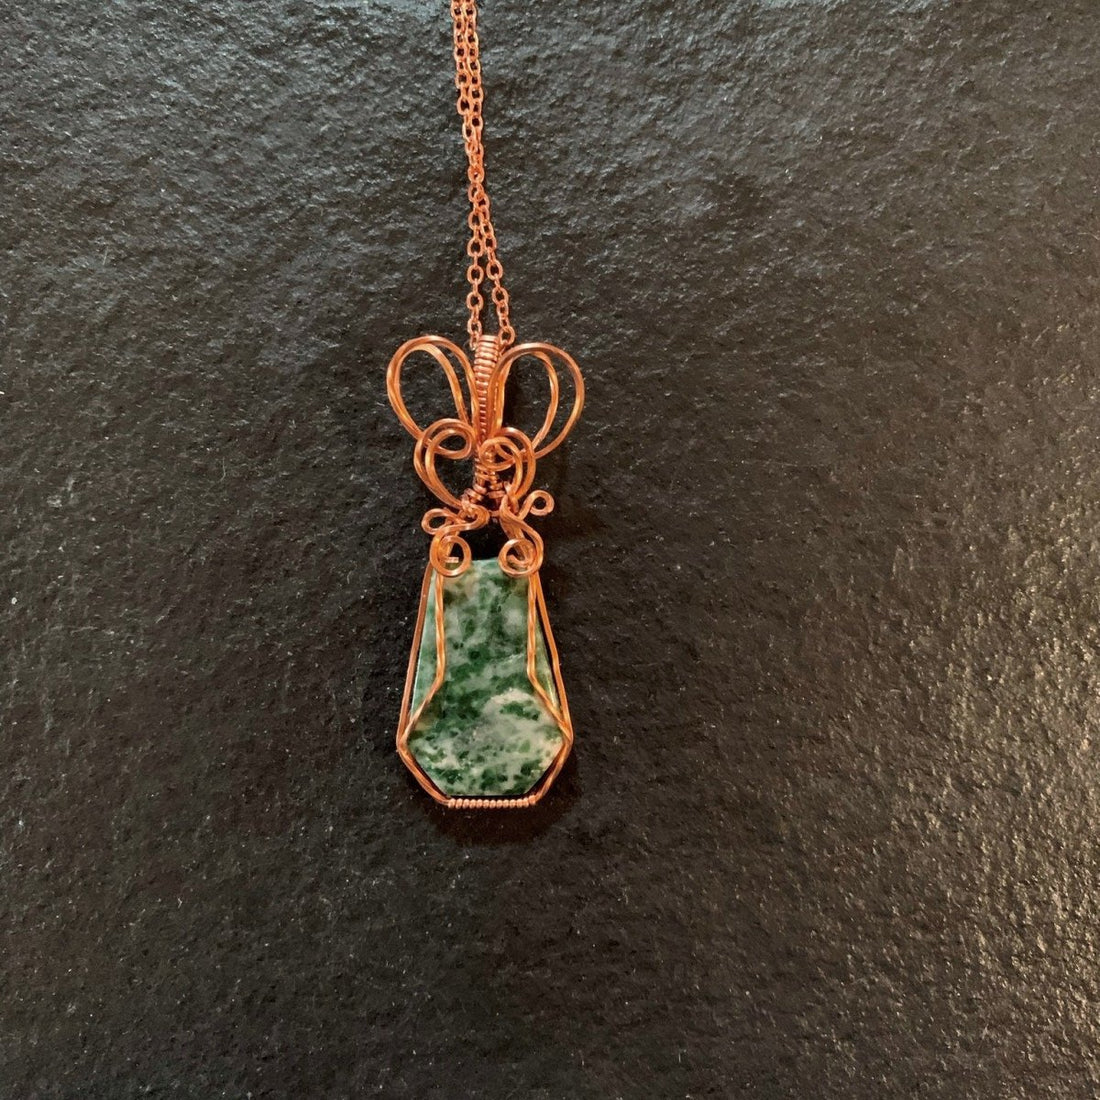 Pendant made of Green Diopside Quartz Hexagon with copper wire wrap; 7/8" w x 2 1/8" long, incl bail